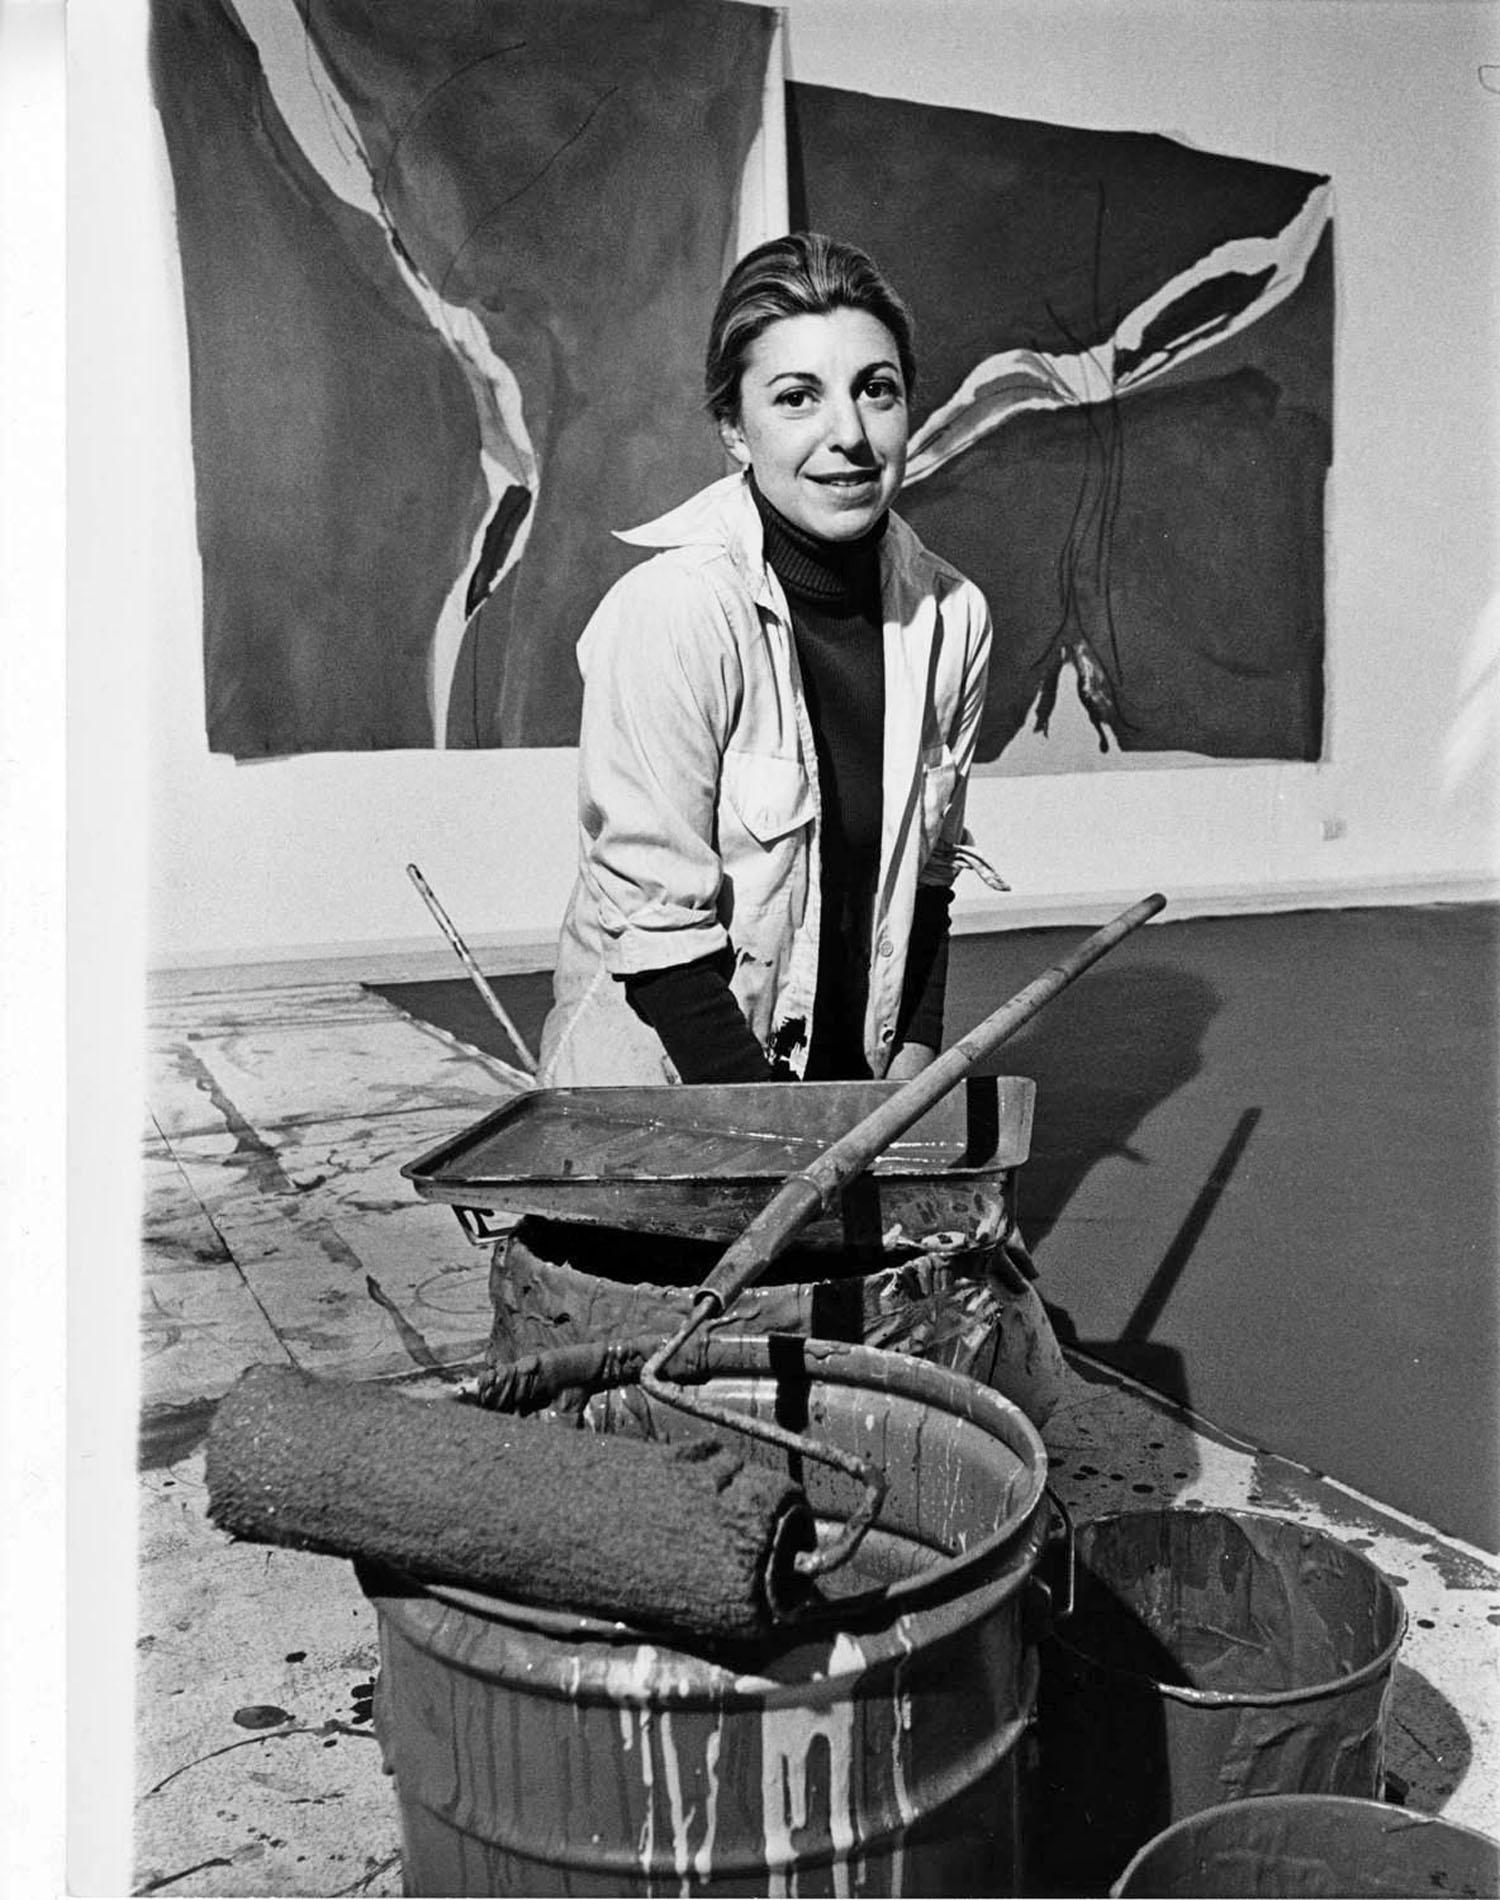 11 x 14" vintage silver gelatin photograph of artist Helen Frankenthaler in her studio in 1971. Signed by Jack Mitchell on the print verso.  Comes directly from the Jack Mitchell Archives with a certificate of authenticity.

 Jack Mitchell,